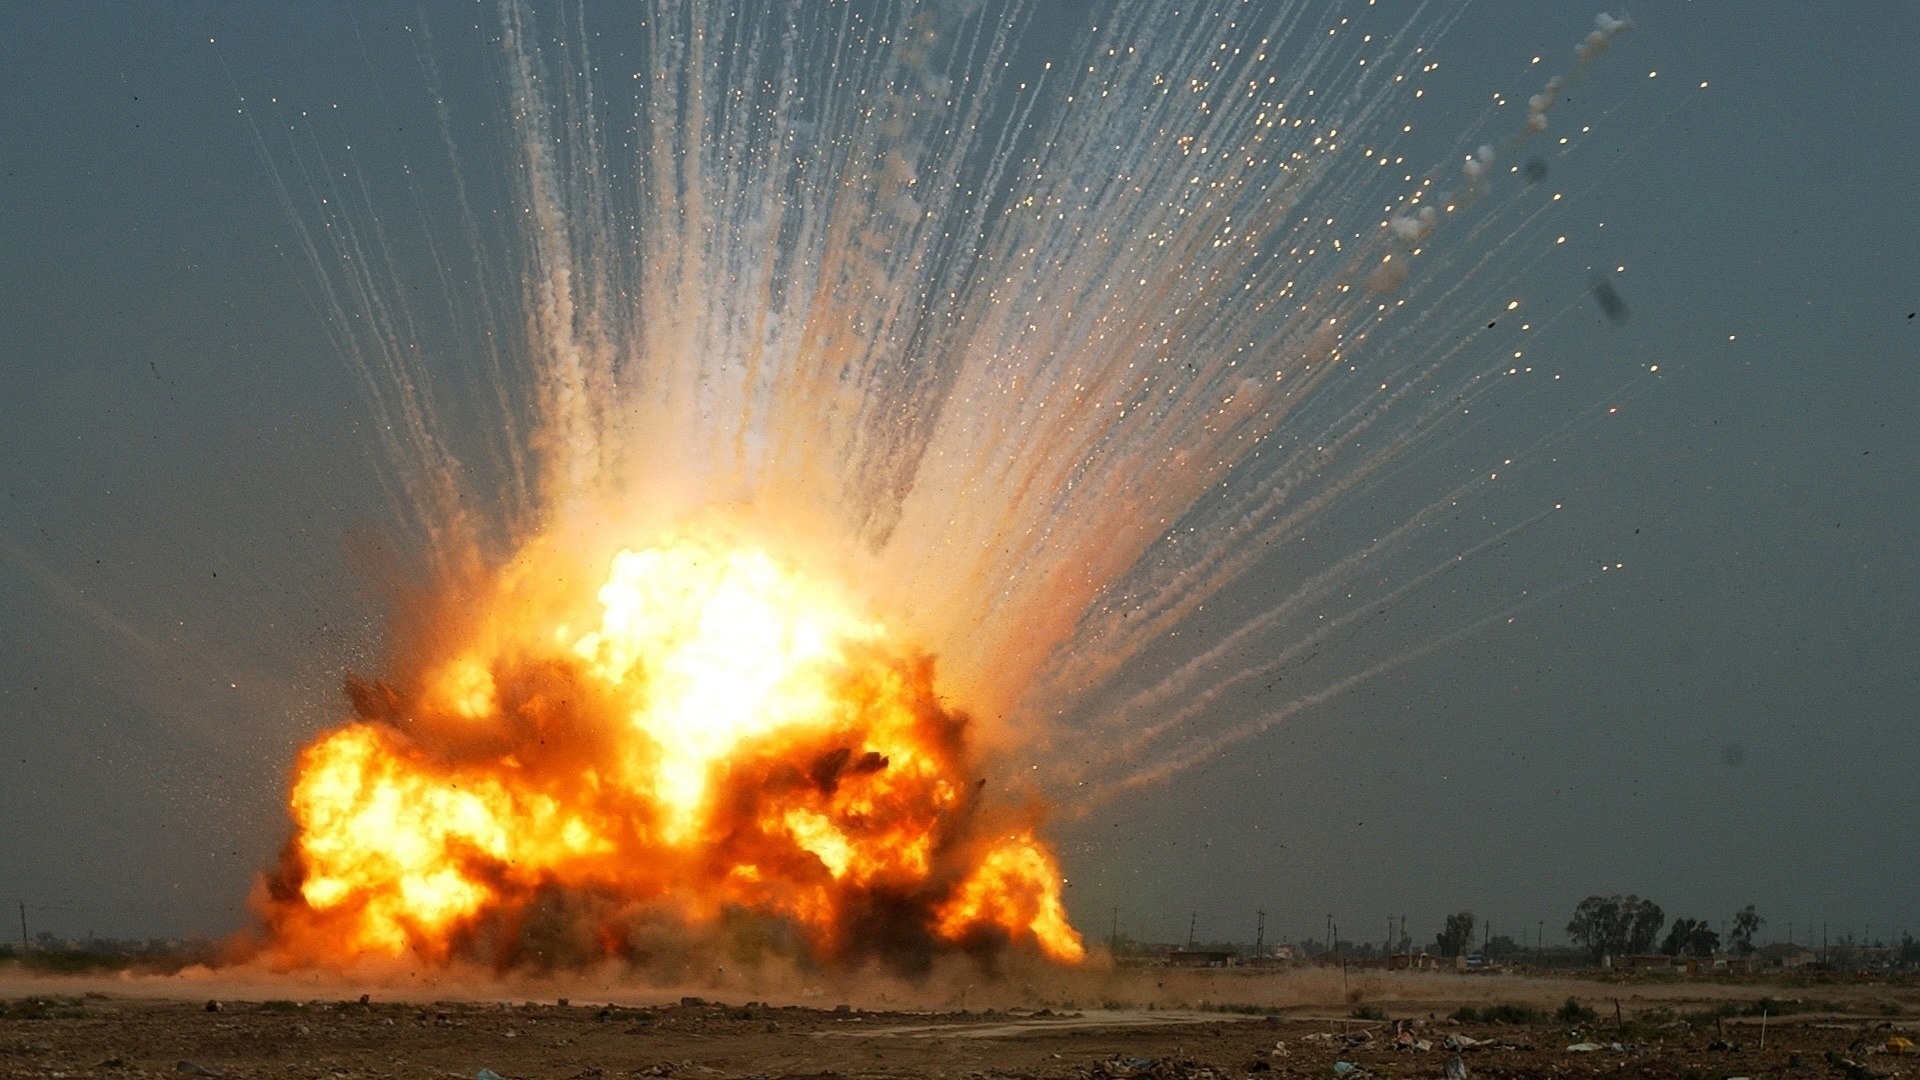 Explosion Res: 1920x1080 HD / Size:571kb. Views: 60211. More Photos (general) wallpapers